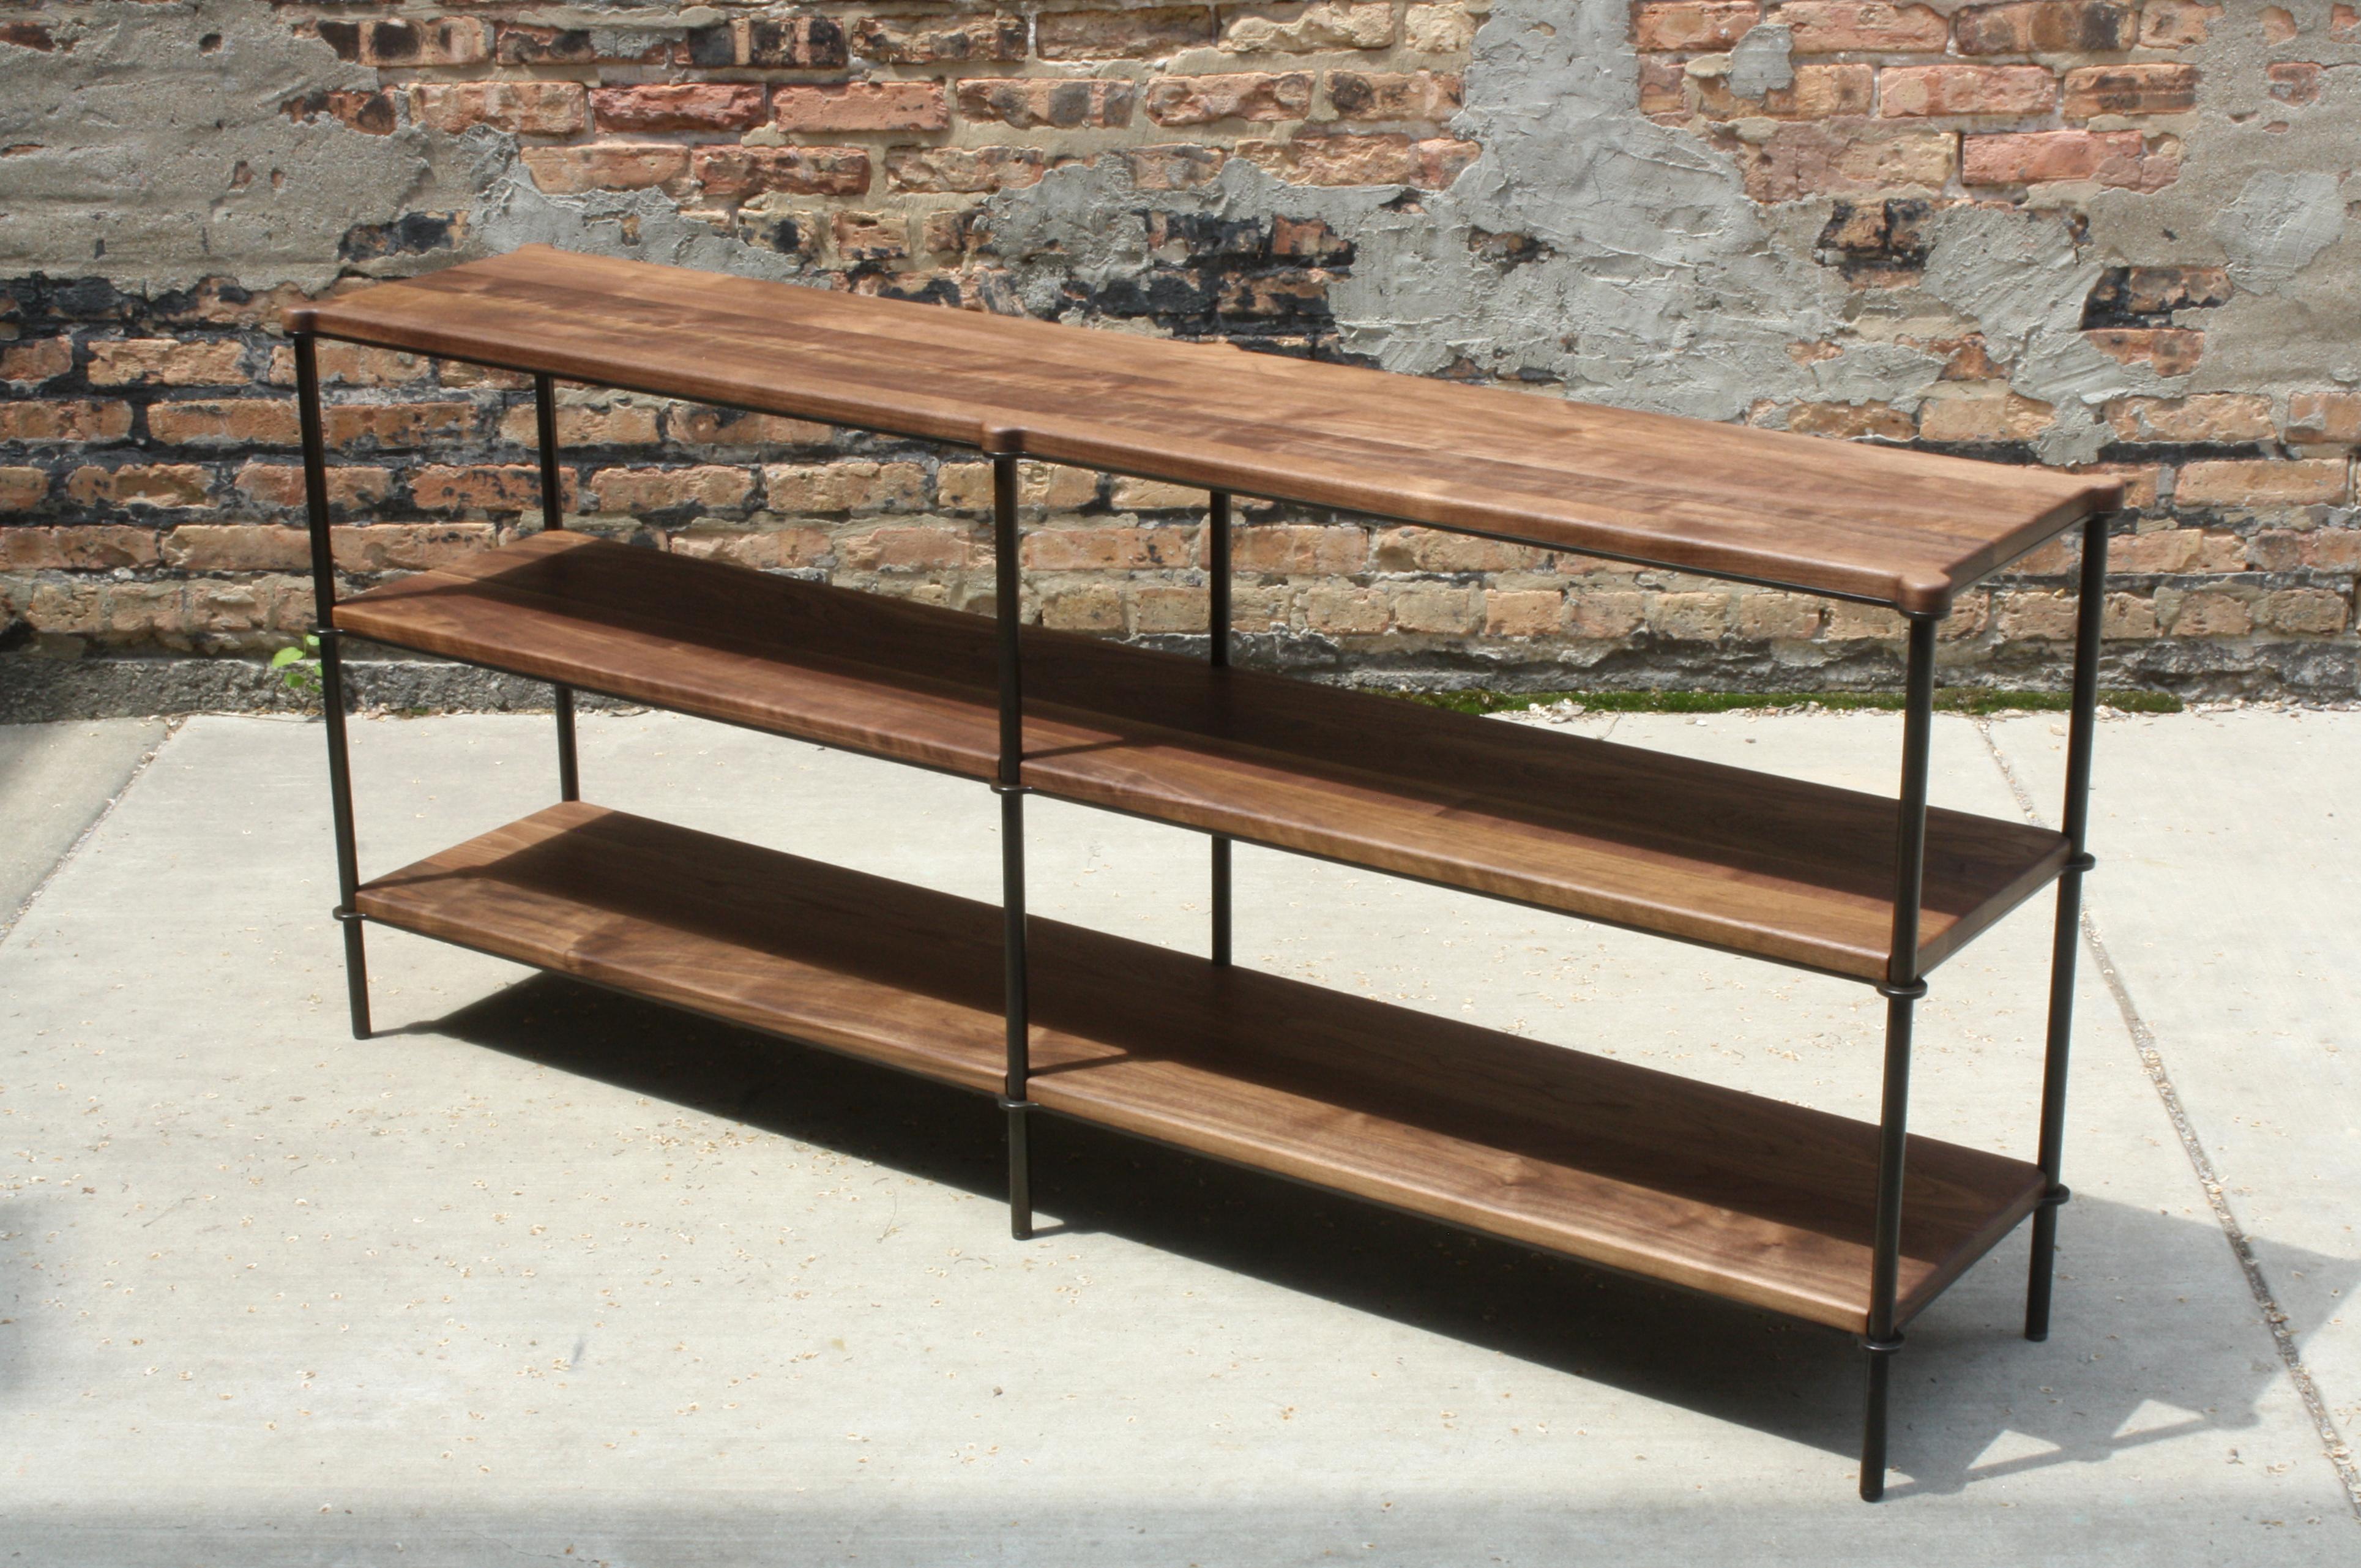 Shown in acid blackened steel with solid walnut shelving
Measures: 66